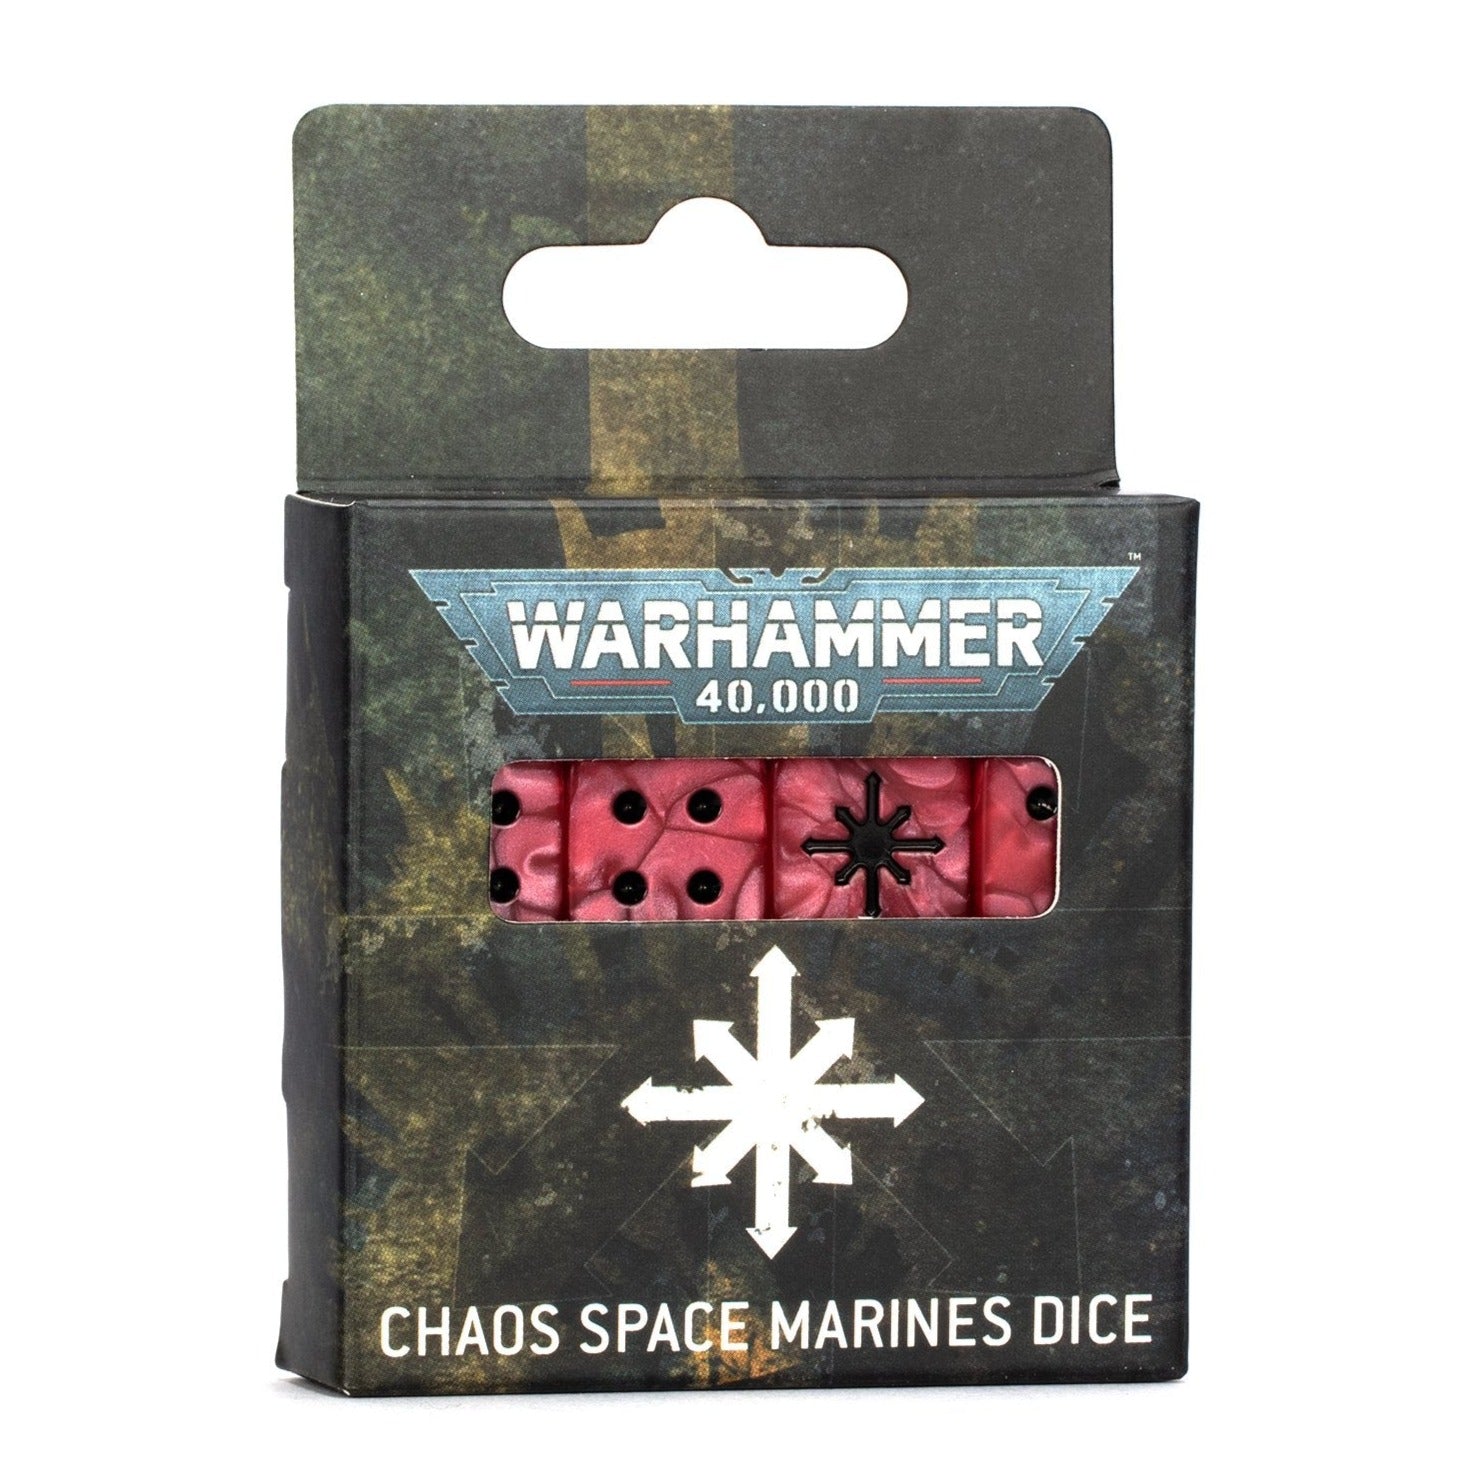 Warhammer 40000: Chaos Space Marines Dice - Release Date 25/5/24 - Loaded Dice